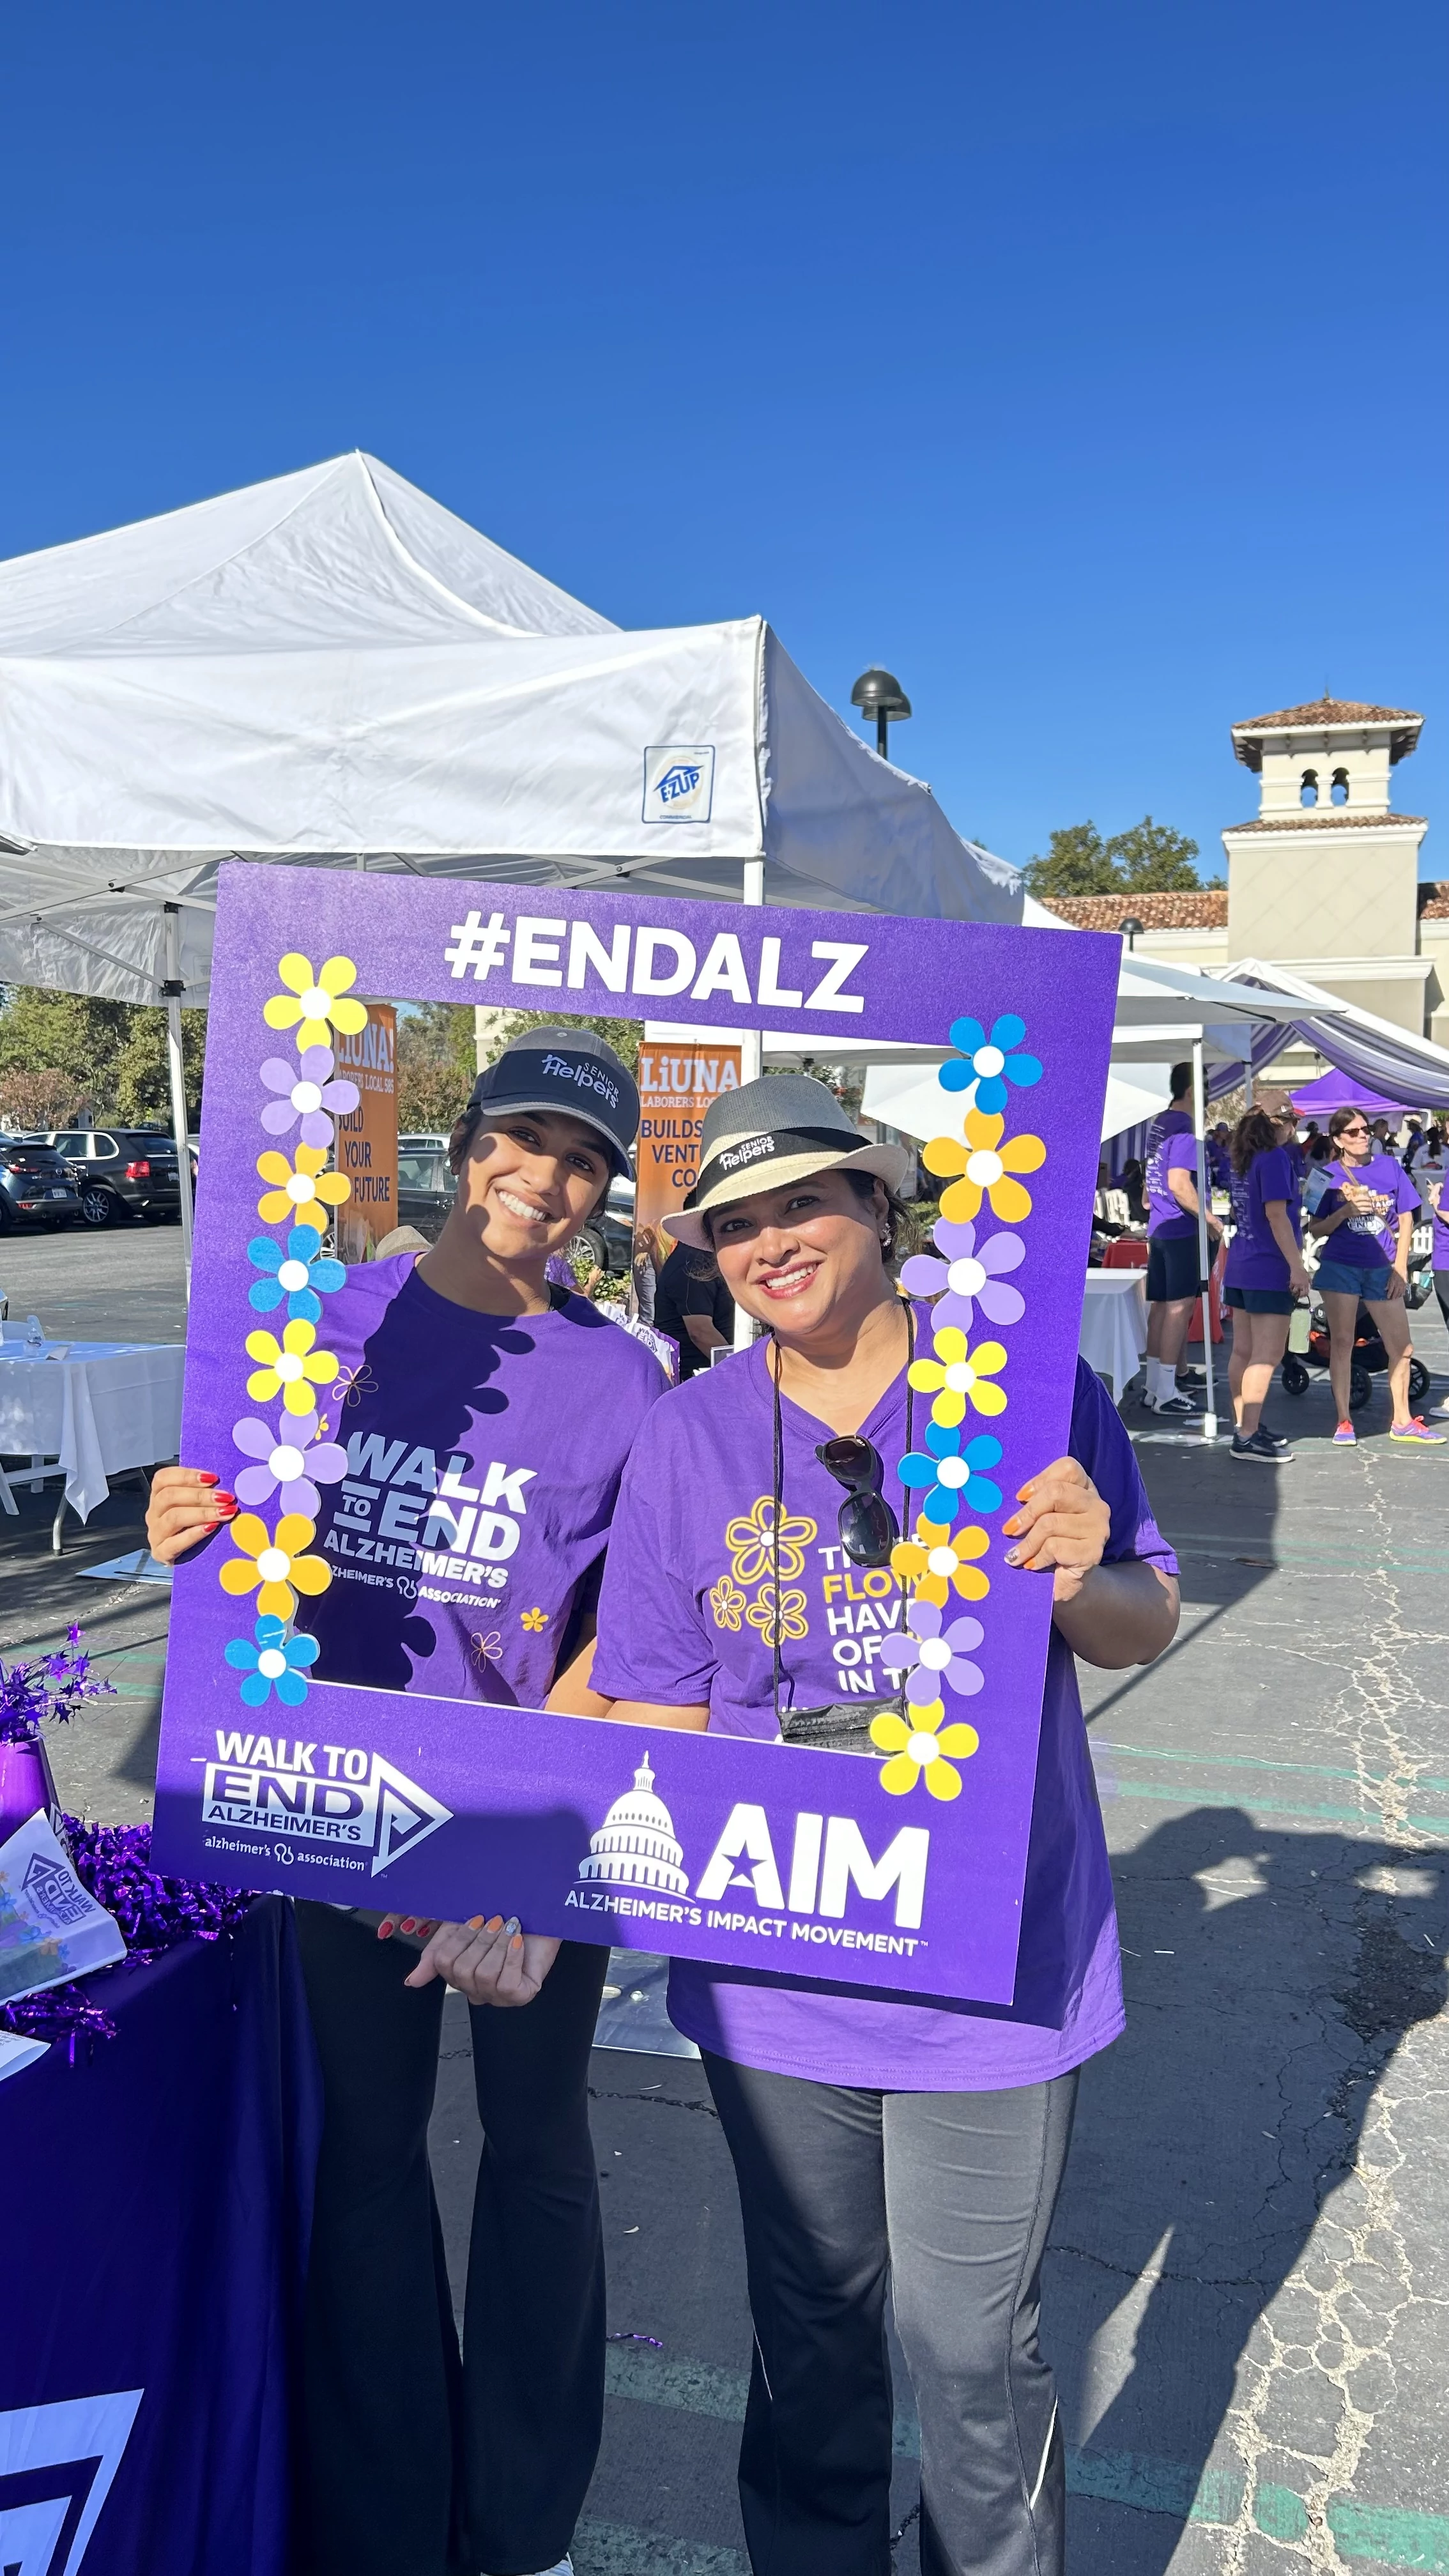 We participated in this year’s Walk to End Alzheimer’s for East Ventura County. It was great to see the community come together to be able to raise funds and awareness for such an important cause.